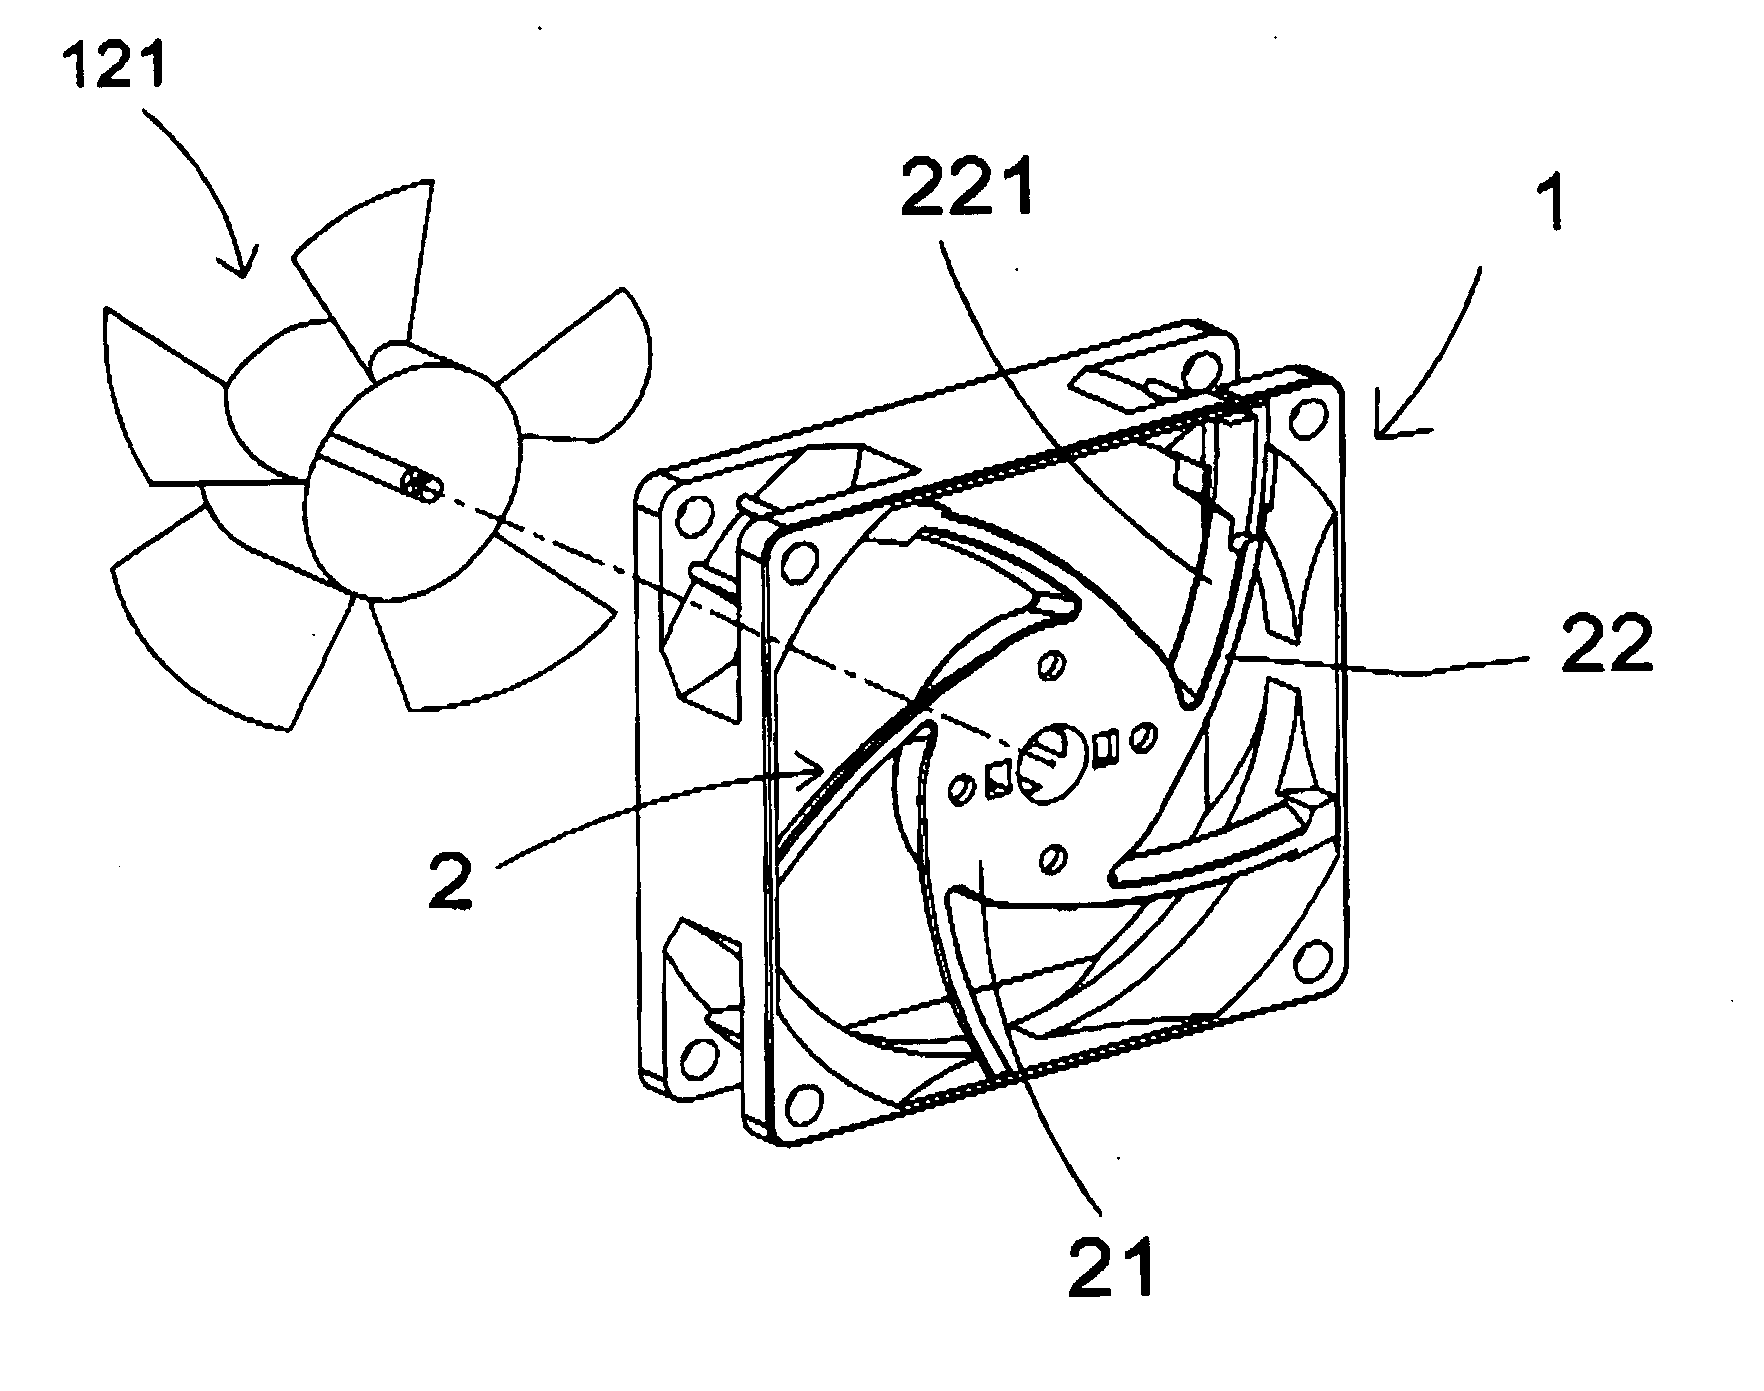 Fan with guiding rib in vent